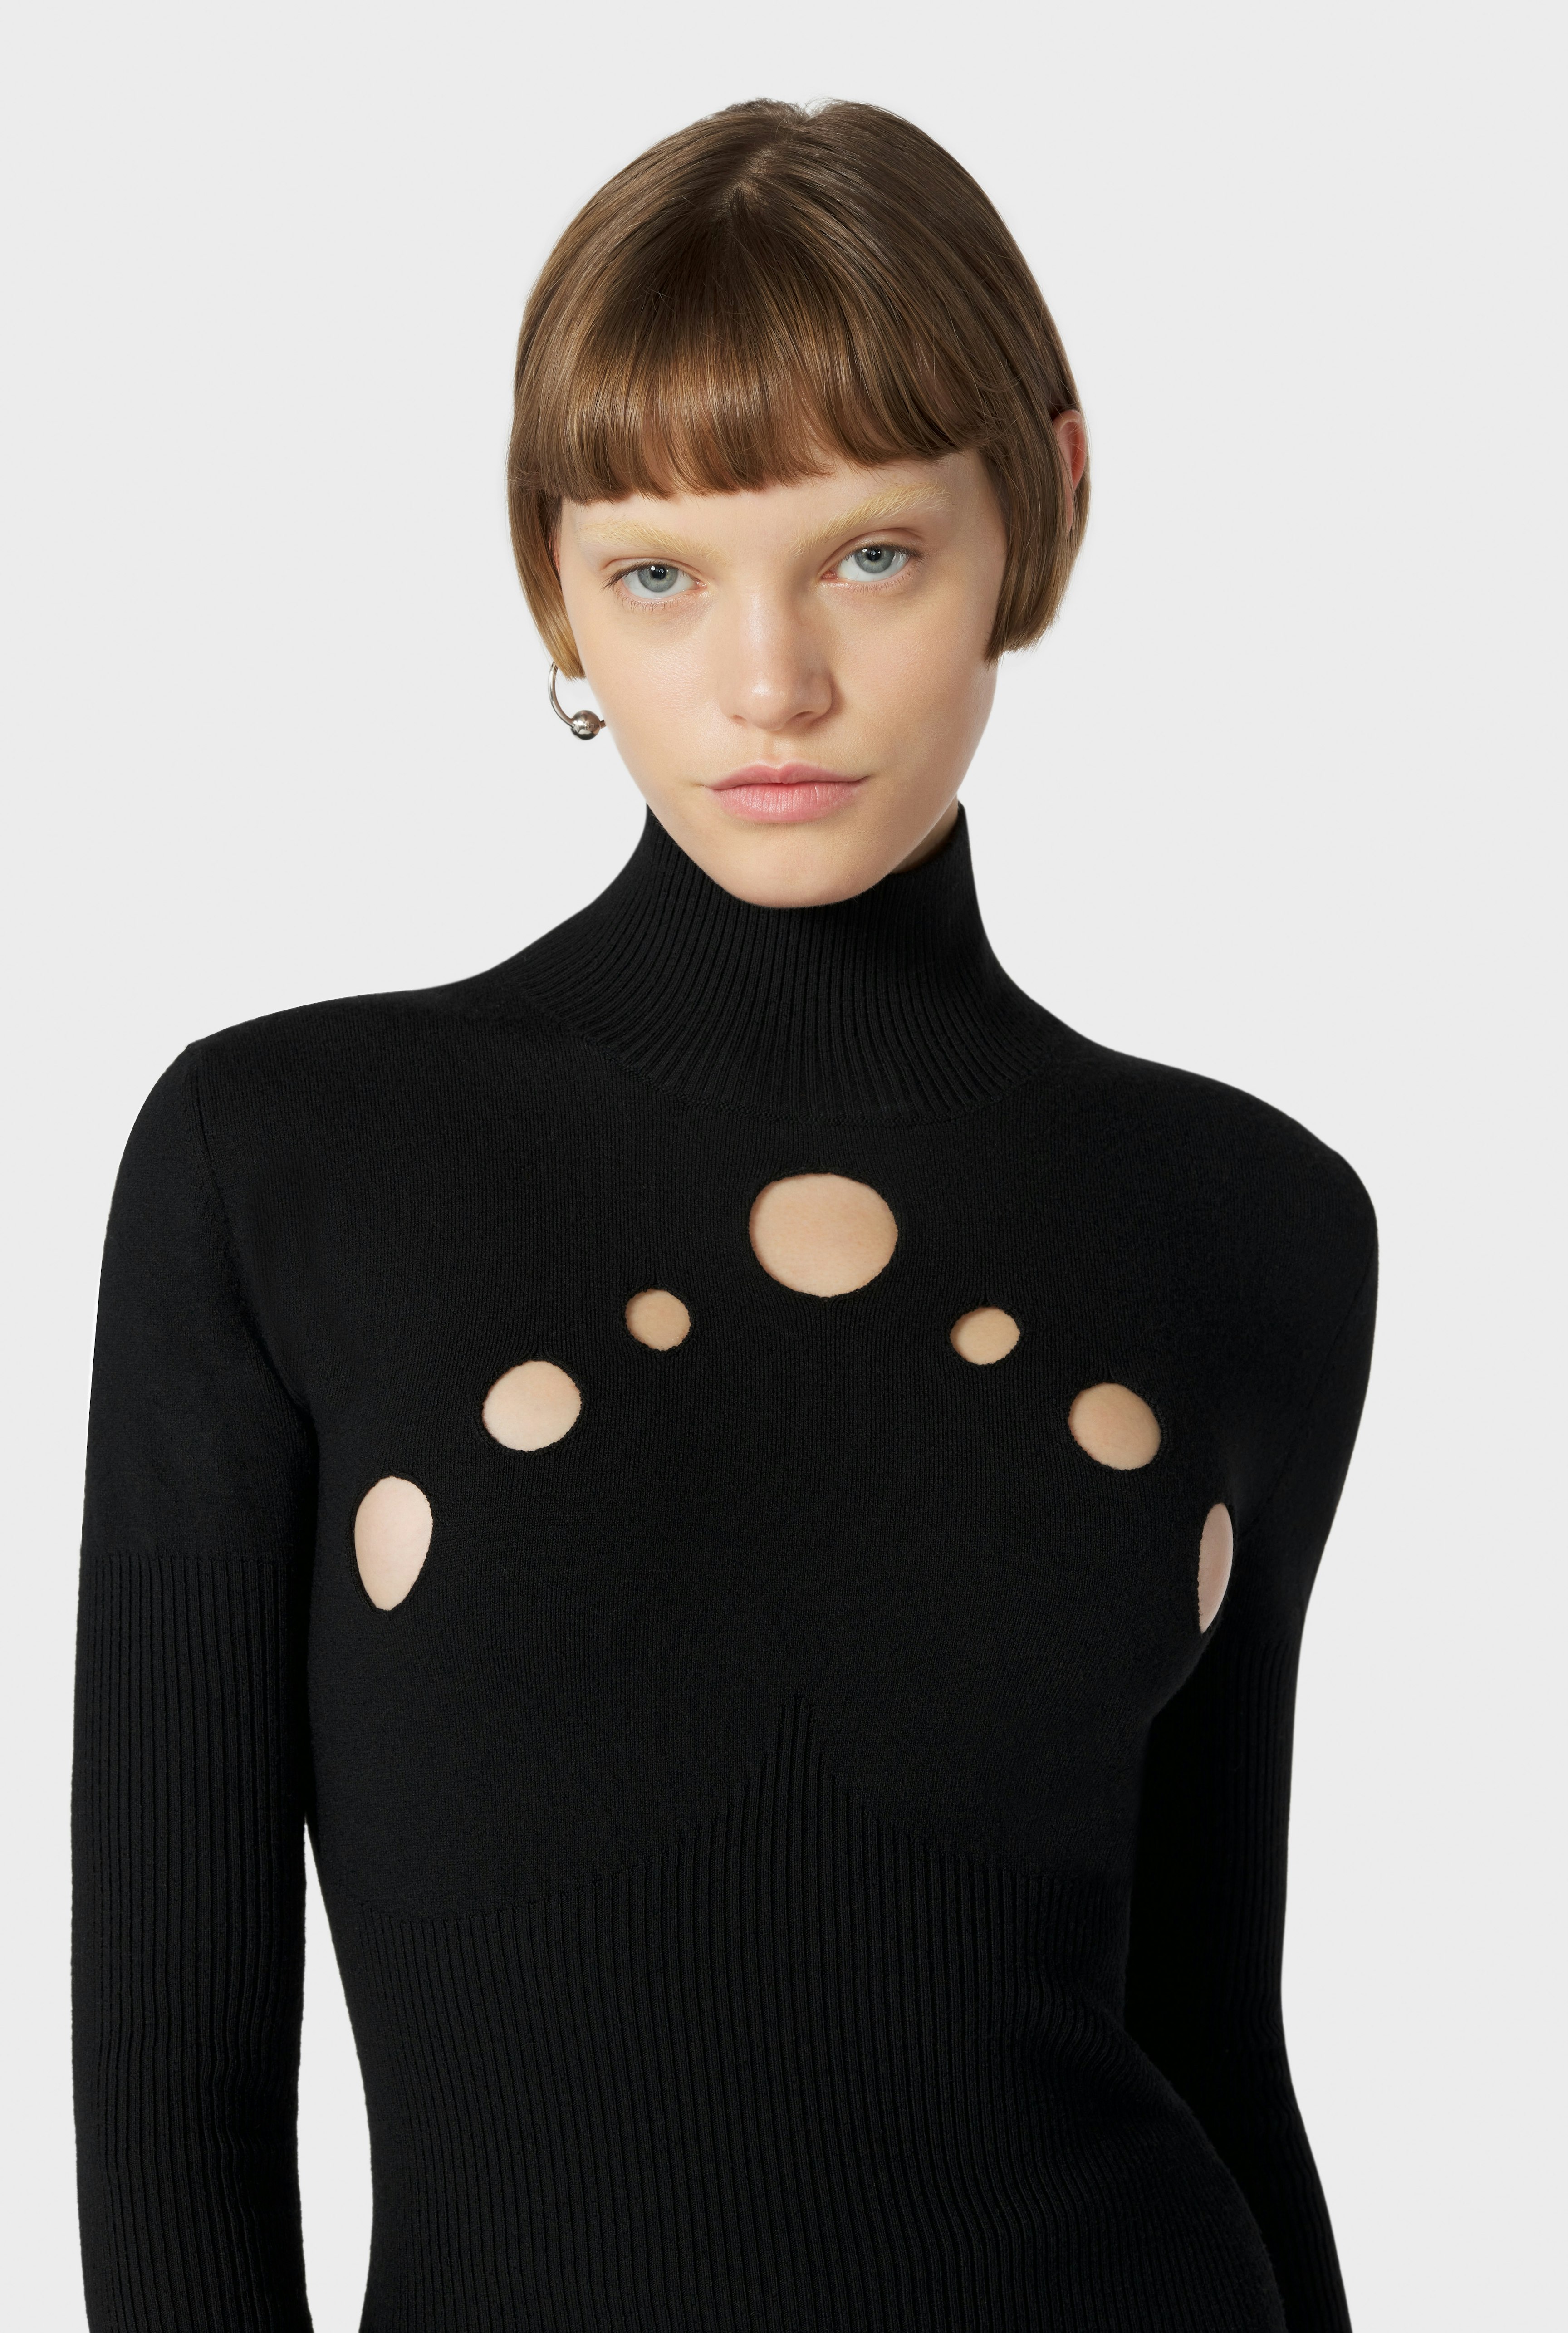 The Black Openworked Knit Sweater